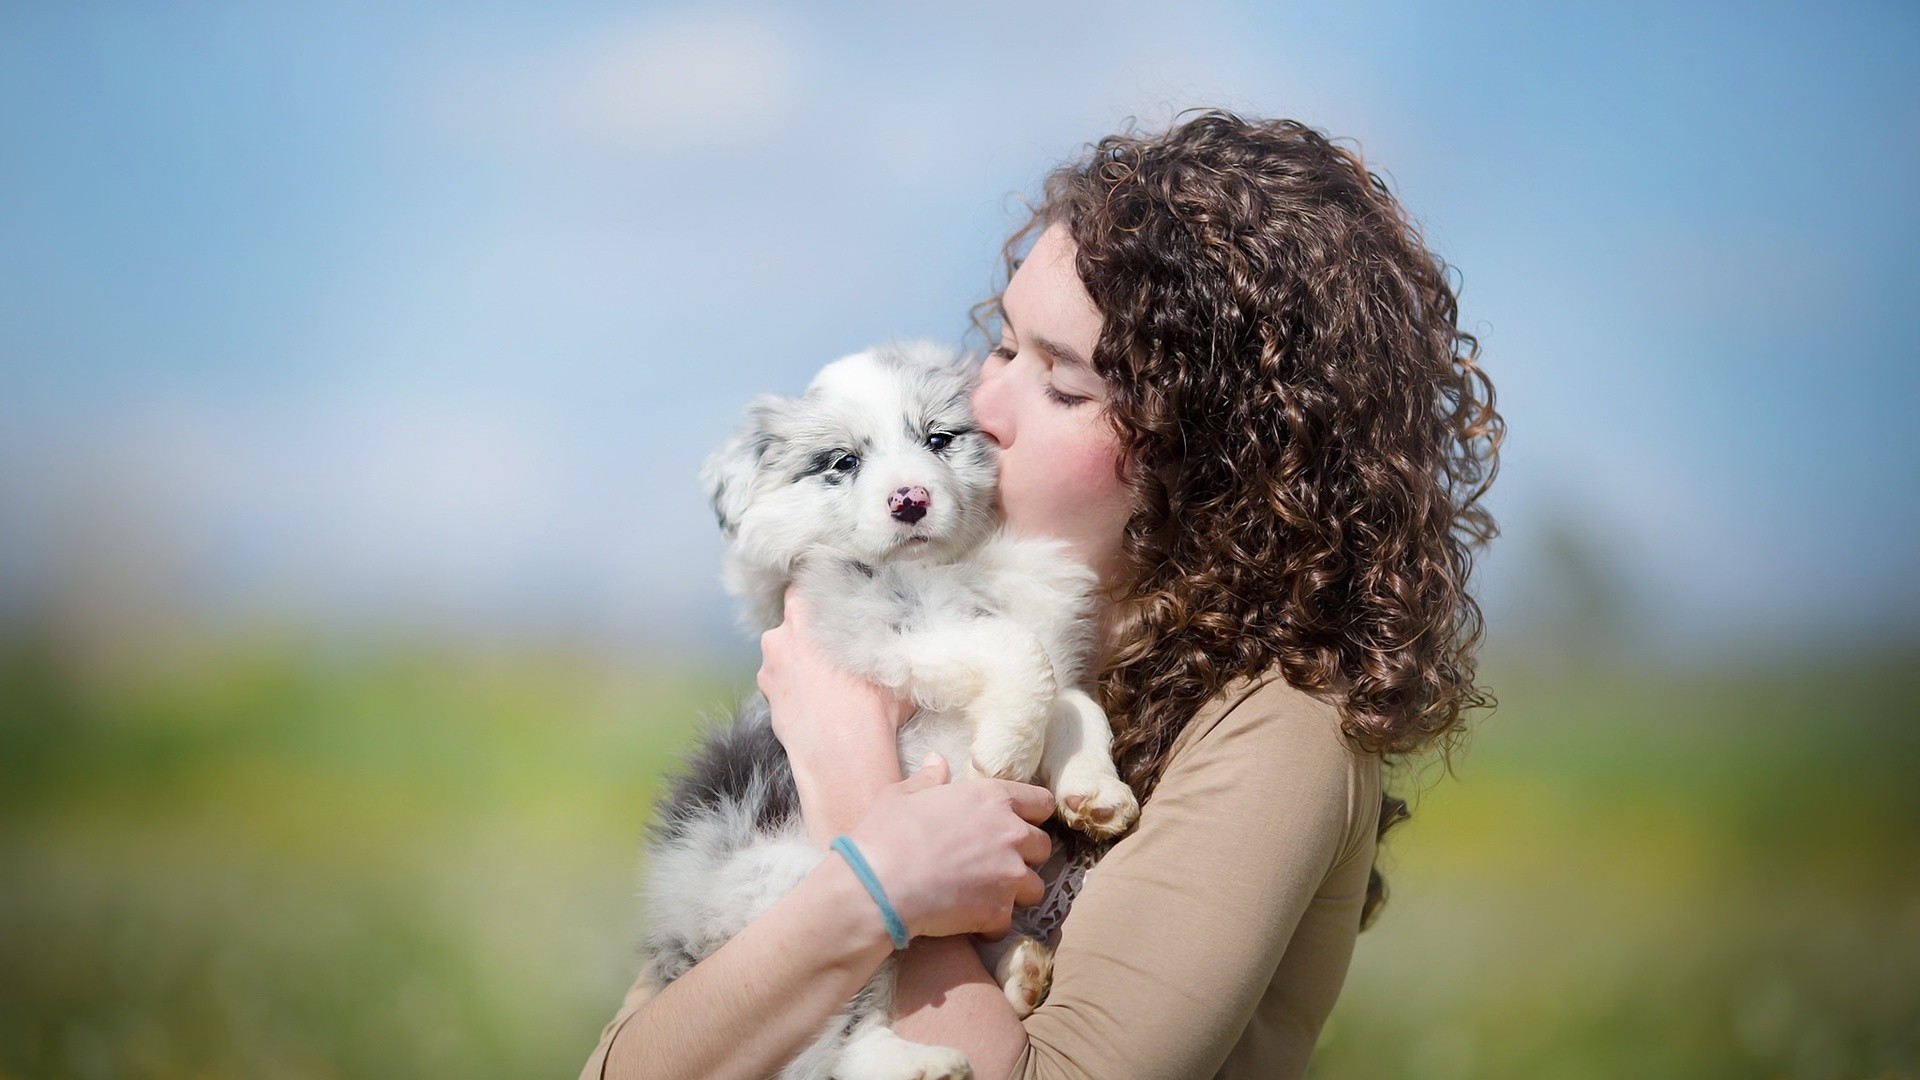 People 1920x1080 women model brunette long hair women outdoors depth of field curly hair animals baby animals dog closed eyes pet